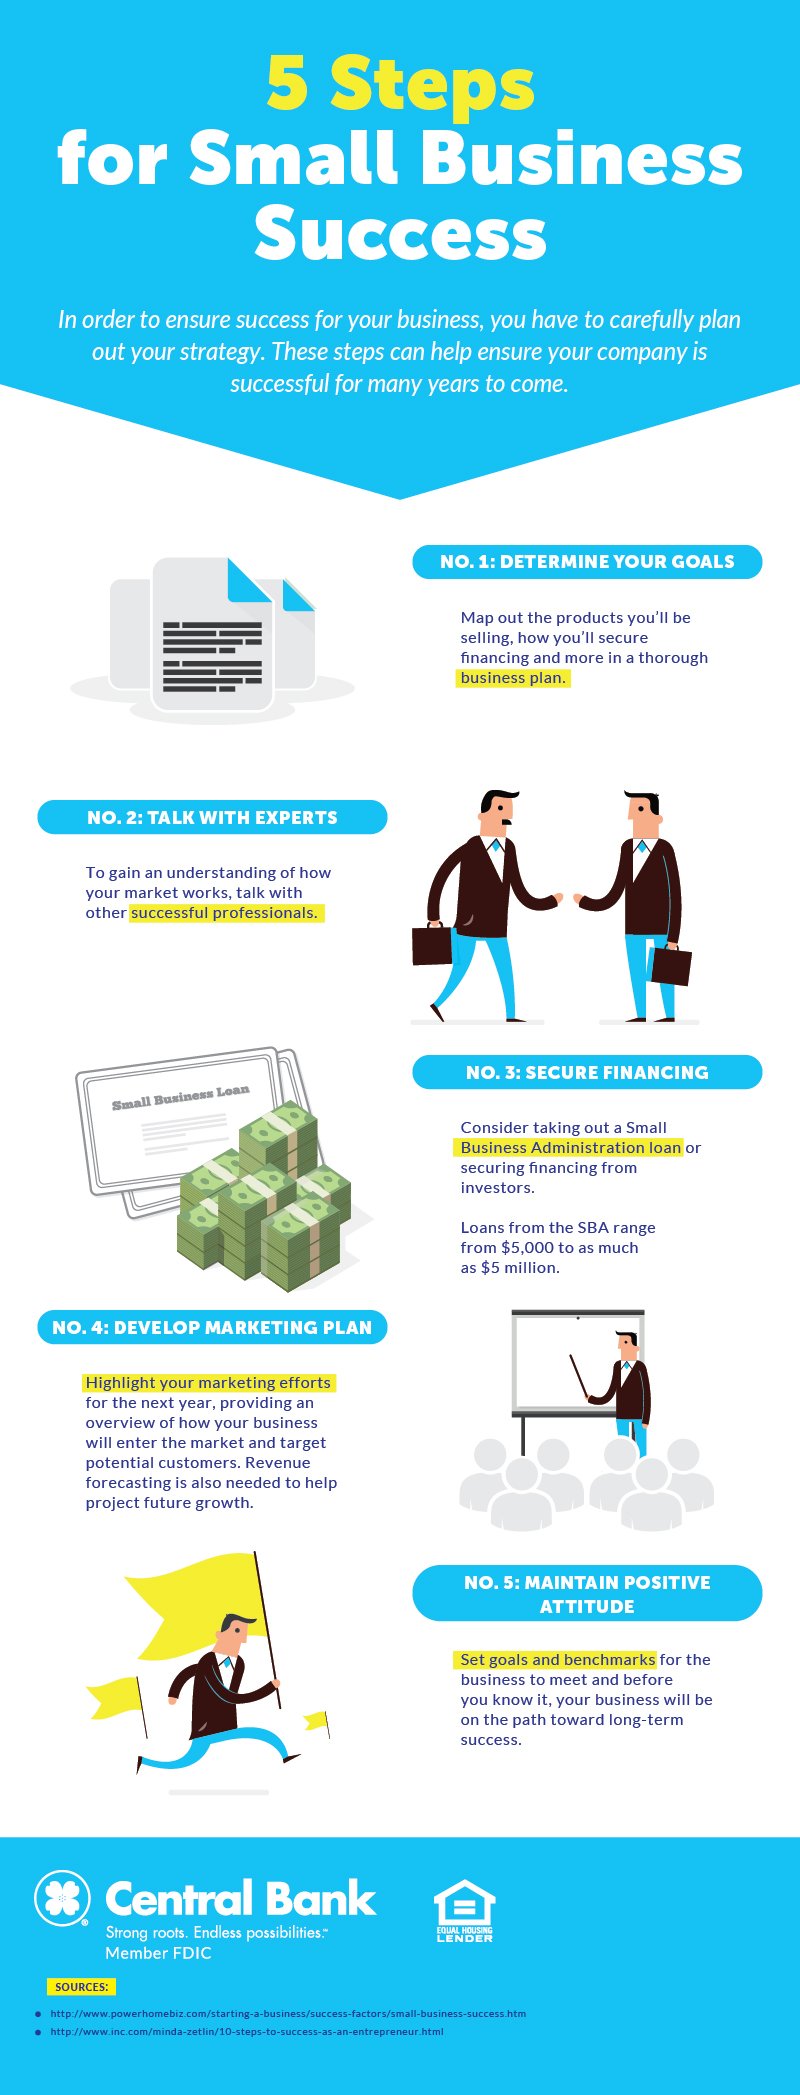 An infographic about 5 steps for small businesses to be successful